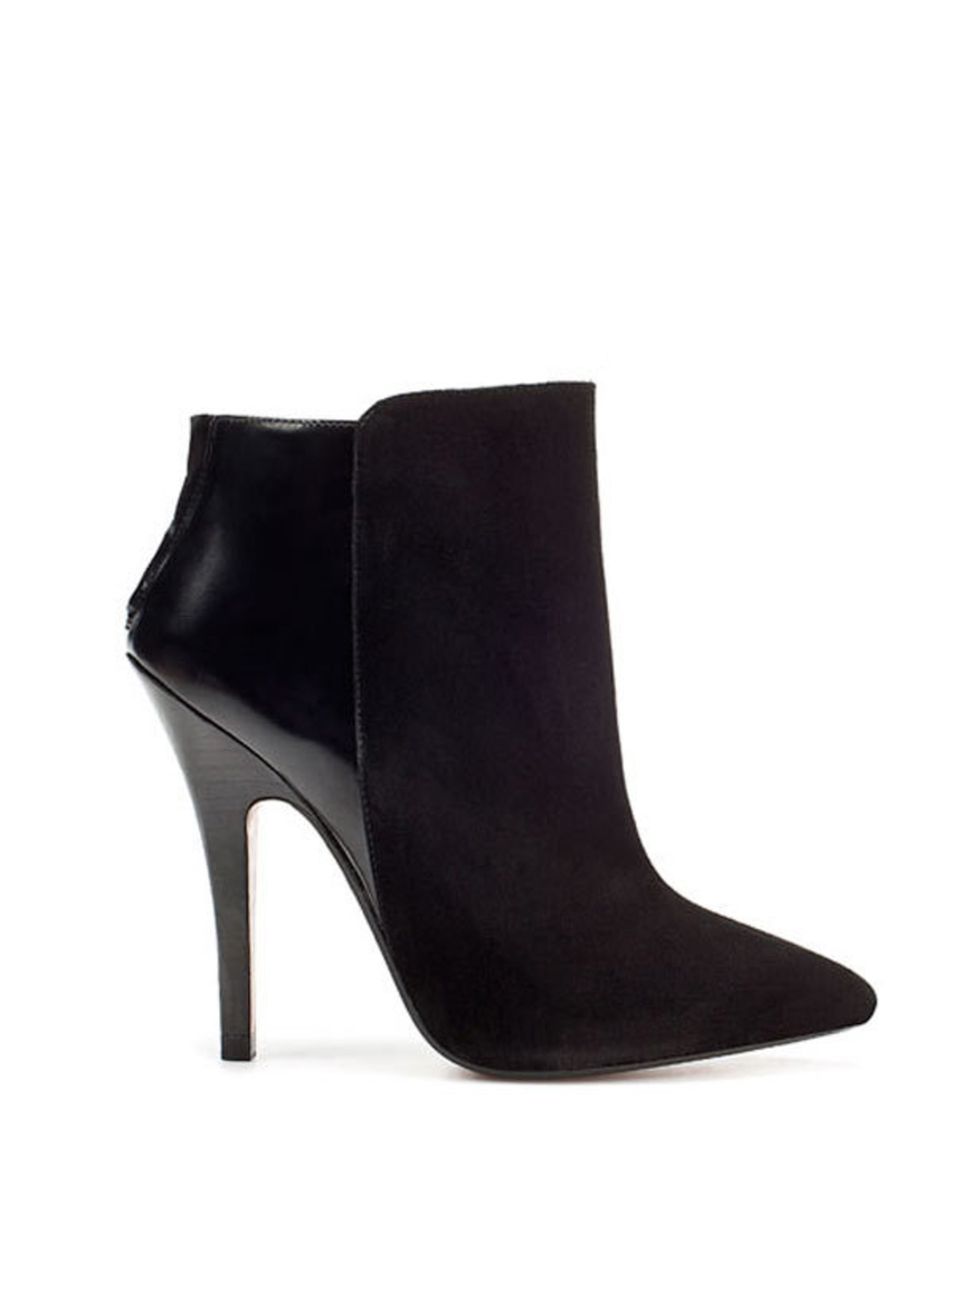 <p><a href="http://www.zara.com/webapp/wcs/stores/servlet/product/uk/en/zara-W2011/118155/522005/HIGH%2BHEEL%2BPOINTED%2BANKLE%2BBOOT">Zara</a> pointed ankle boot, £69.99</p>